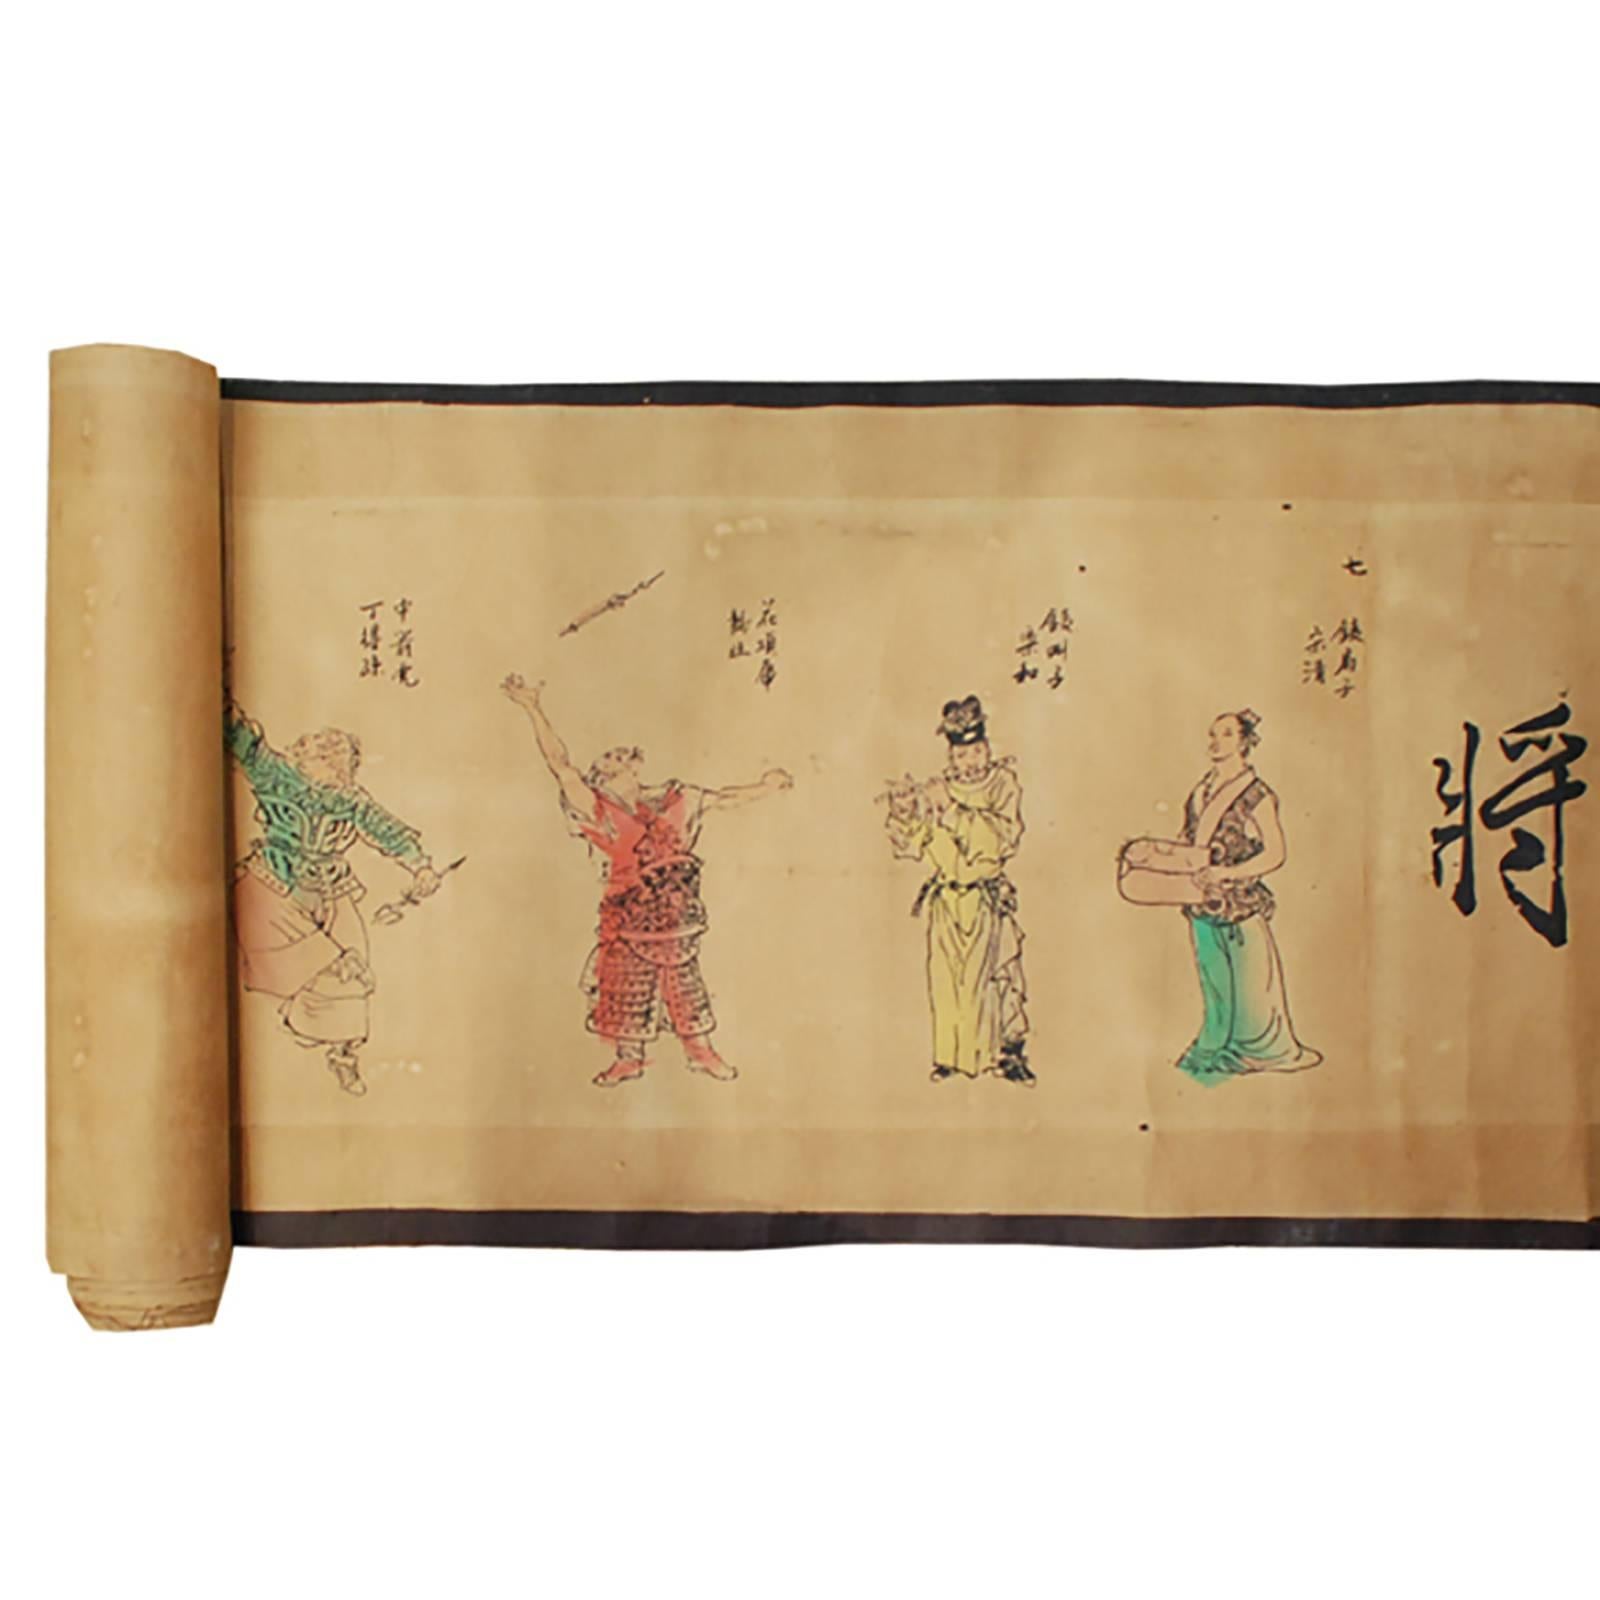 This early 20th century printed and hand-colored hand scroll portrays one third of the 108 heroes from Water Margin, sometimes also known as Outlaws of the Marsh by Shi Nai'an, one of China's four great classical novels. The story takes place during